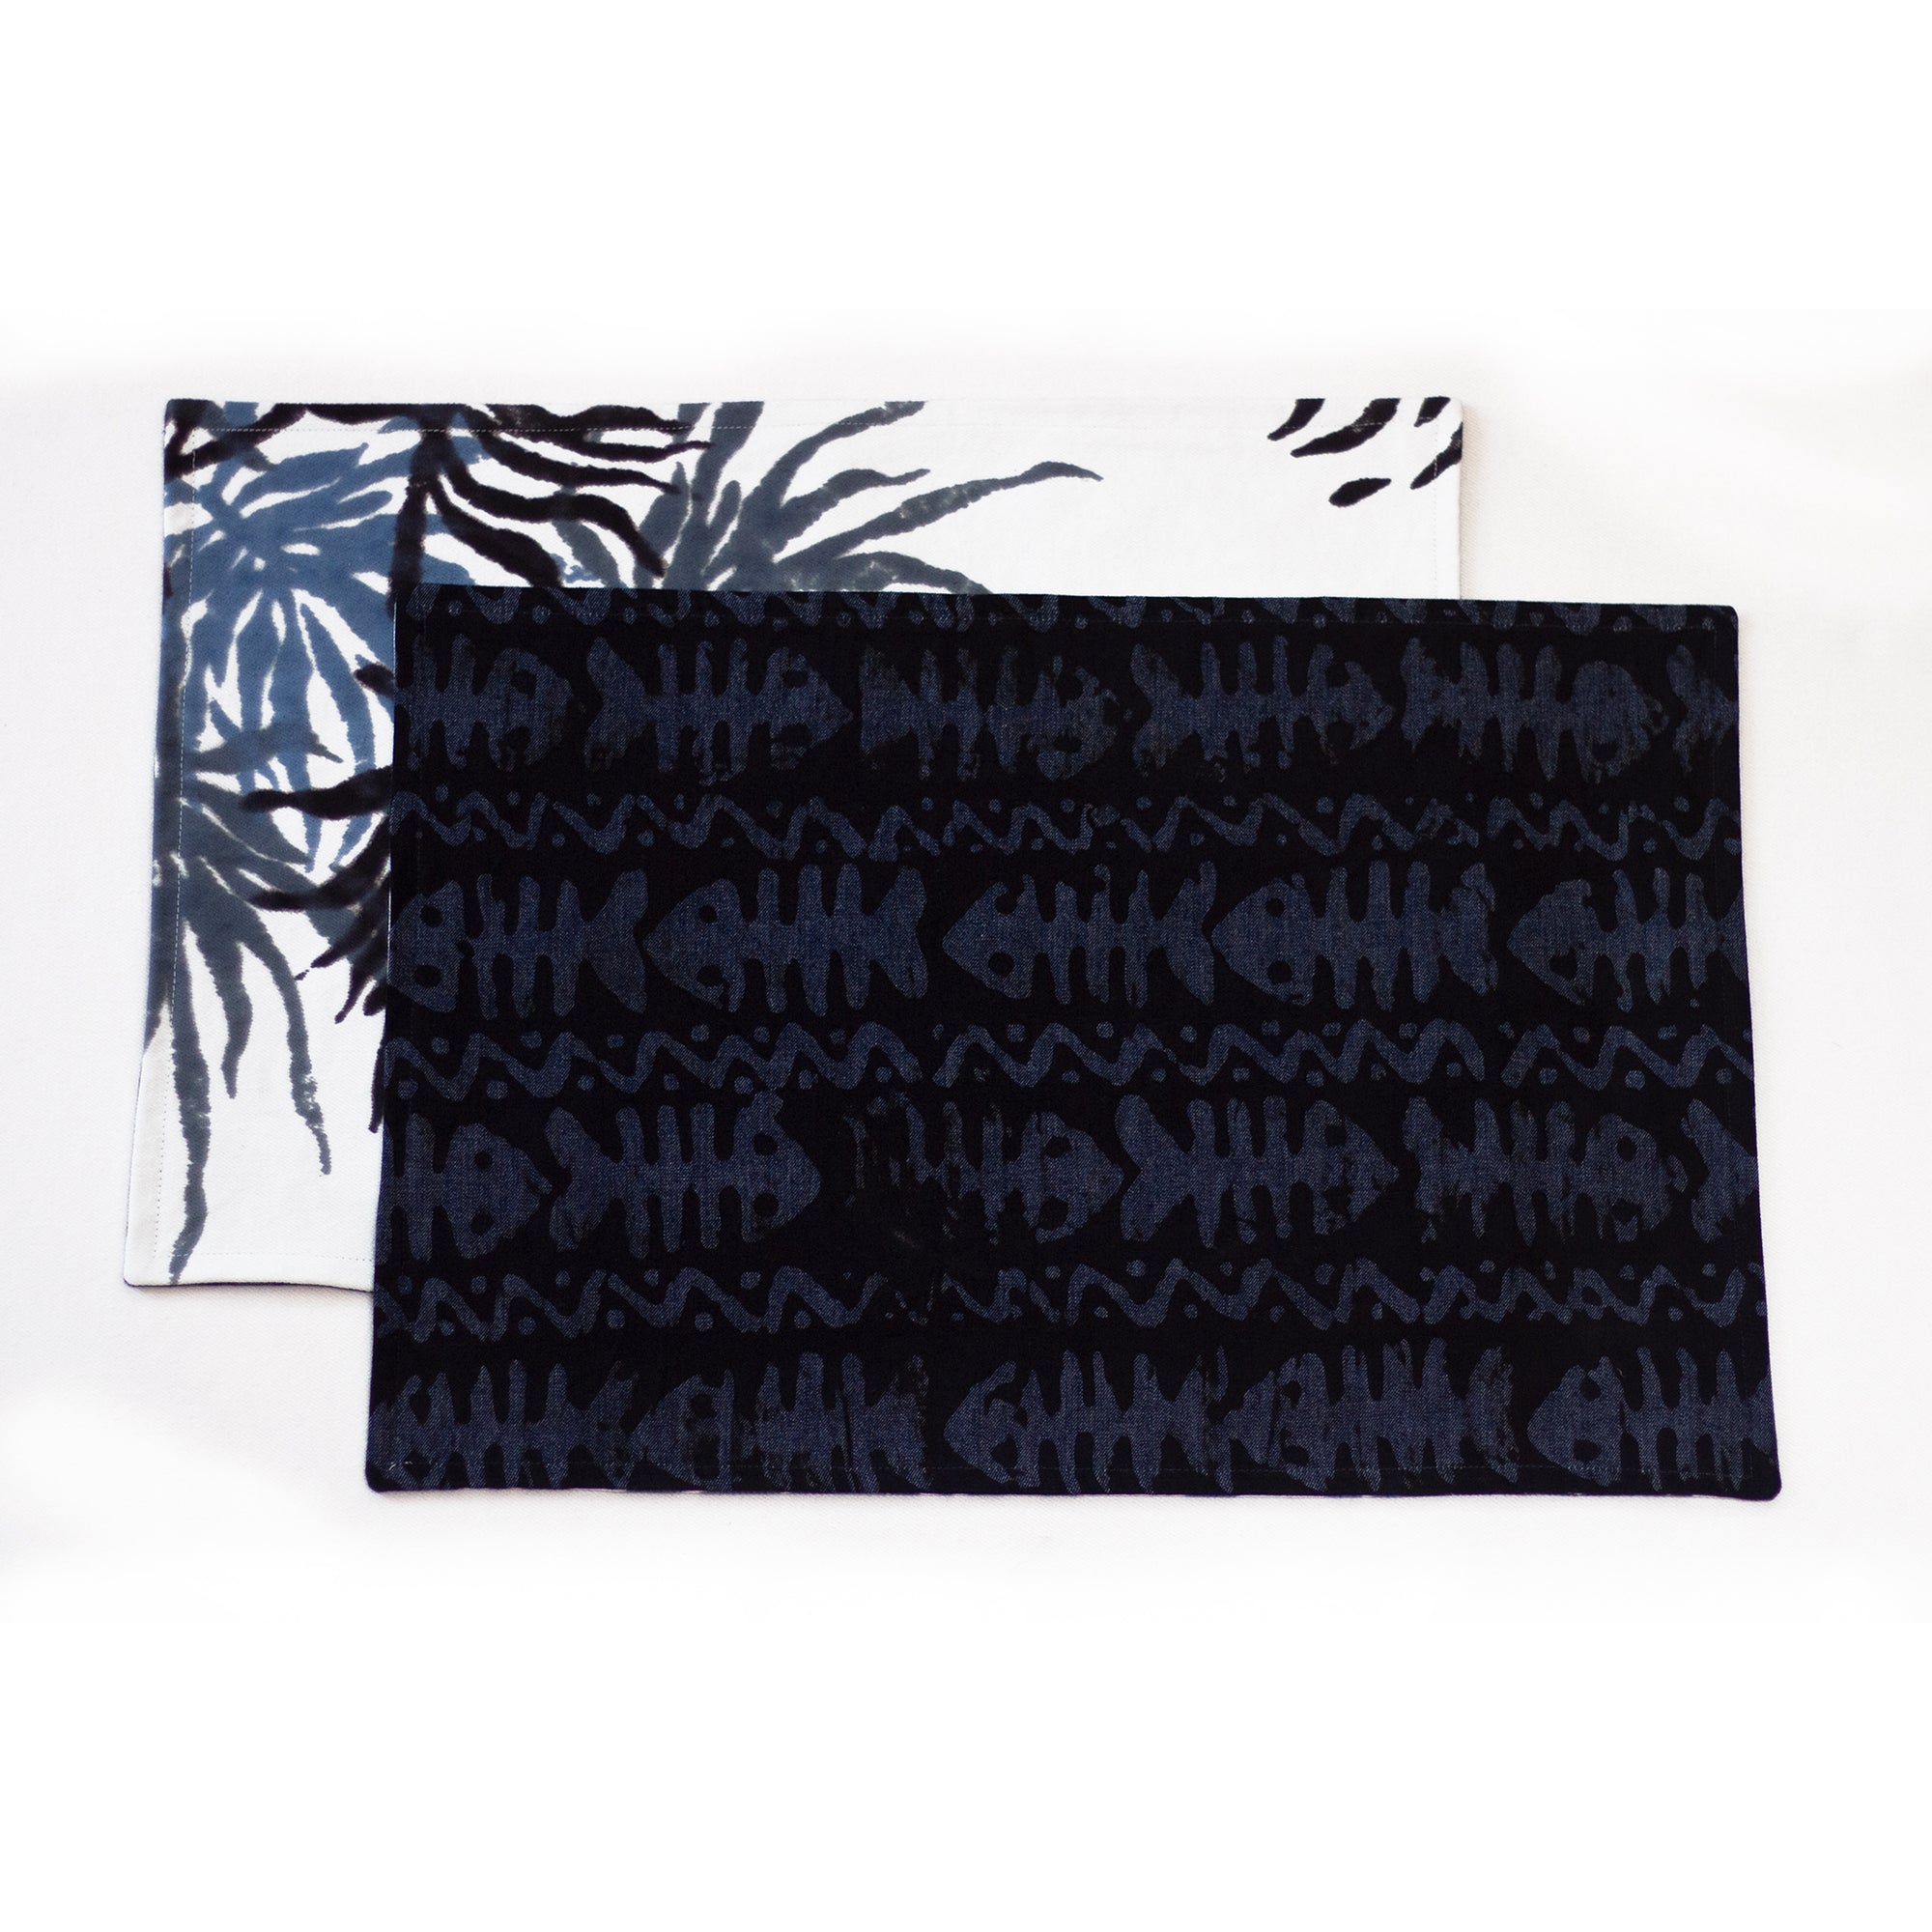 Hand Painted Placemats, Napkins, and Table Runners - Sea Fern/Hungry Fish